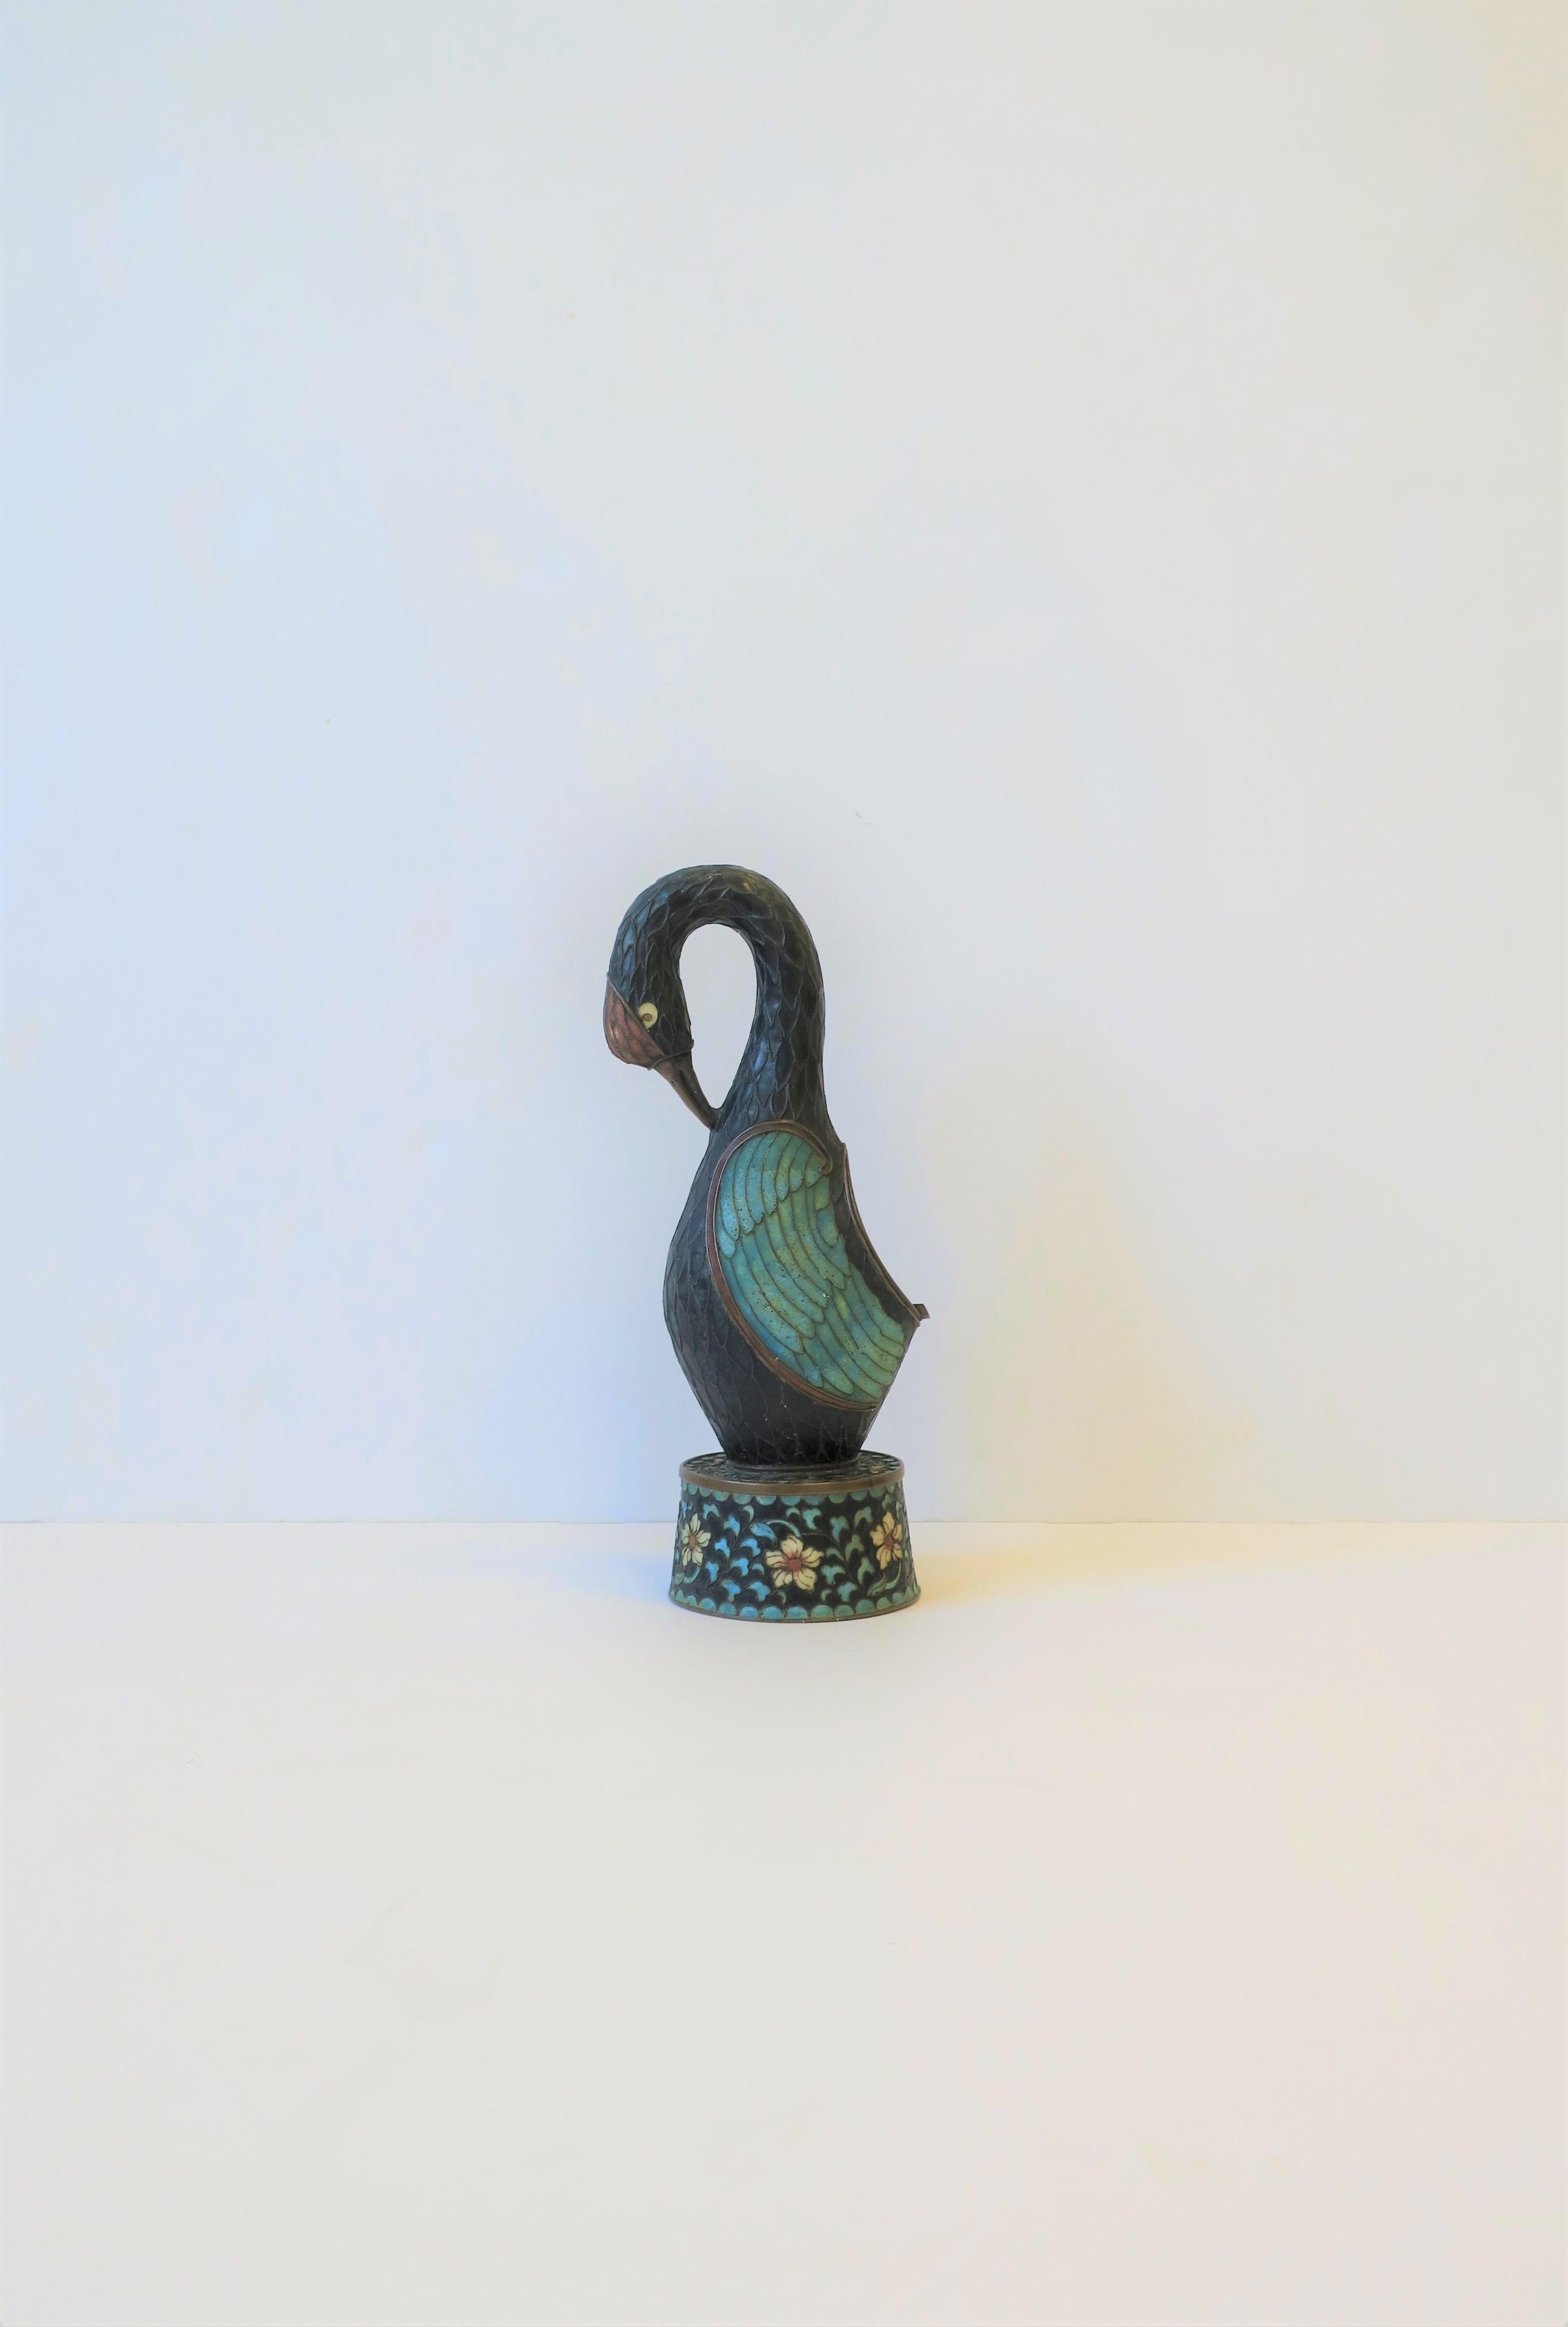 A beautiful Chinese Art Deco period champlevé enamel and bronze bird ashtray or sculpture, circa 1920s-1930s, China. Dimensions: 2.63